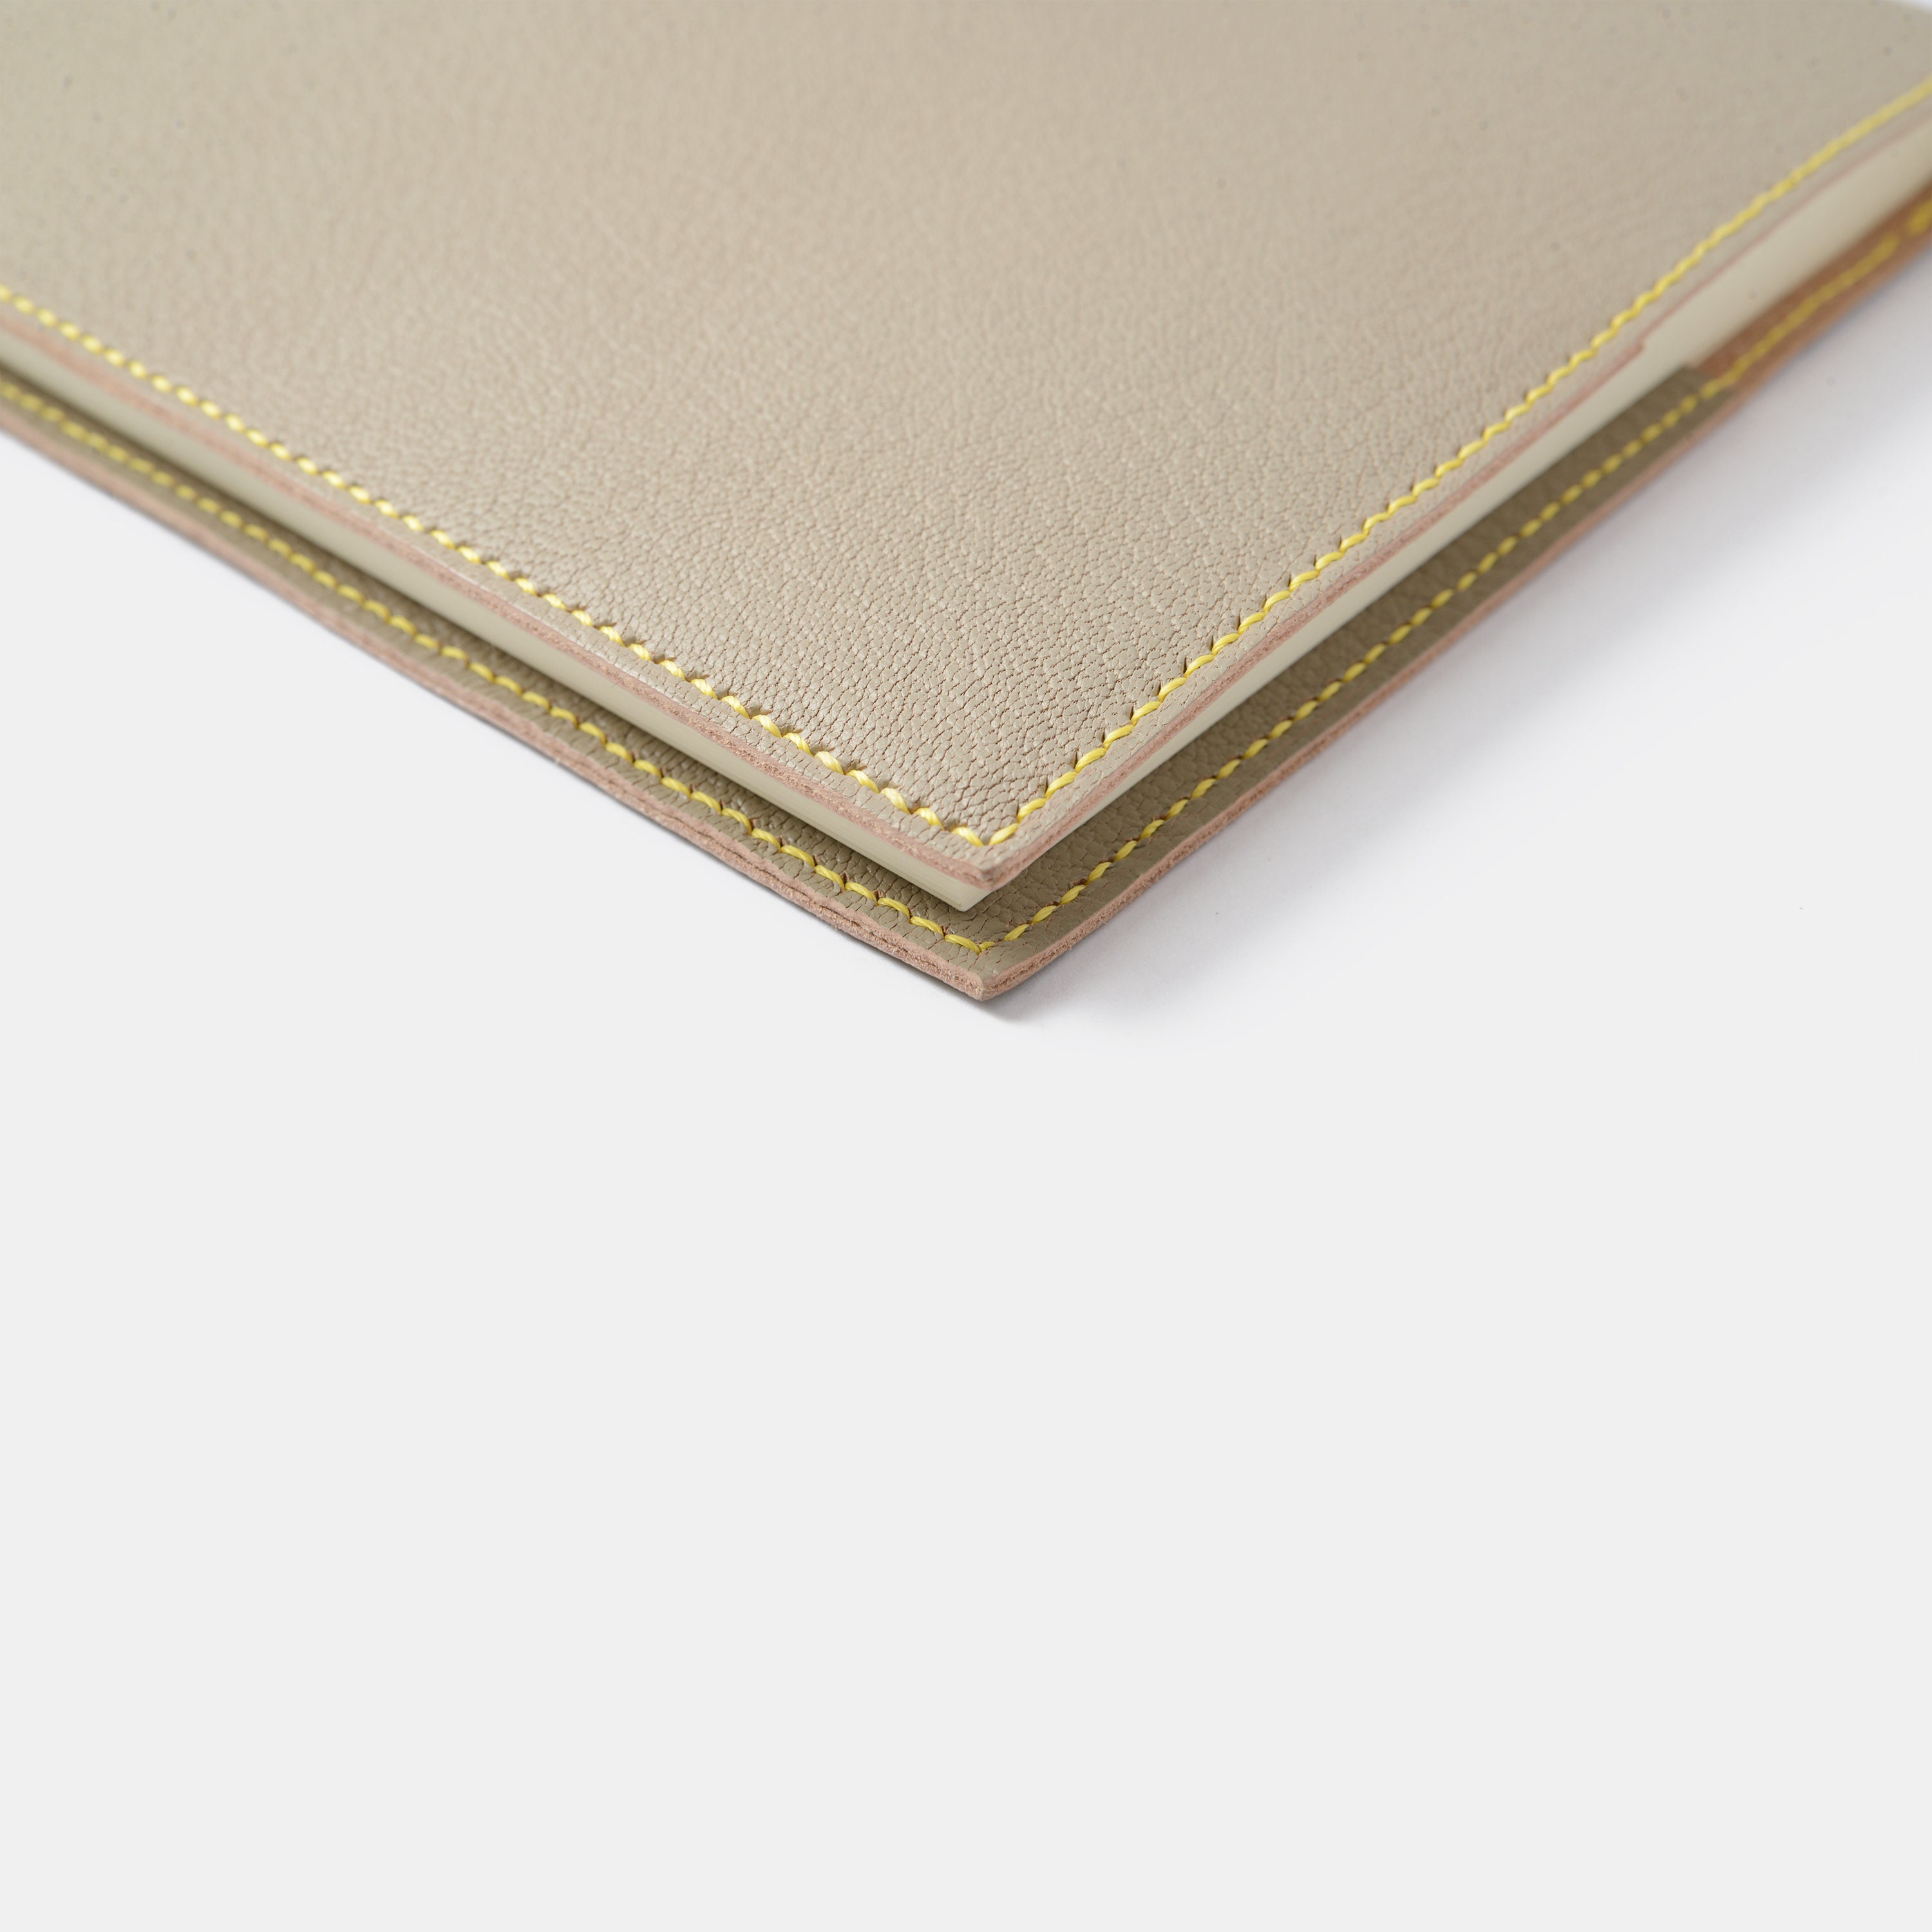 Midori MD A5 Notebook Cover in Chèvre Goat Leather 100% Handcrafted  Personalised 